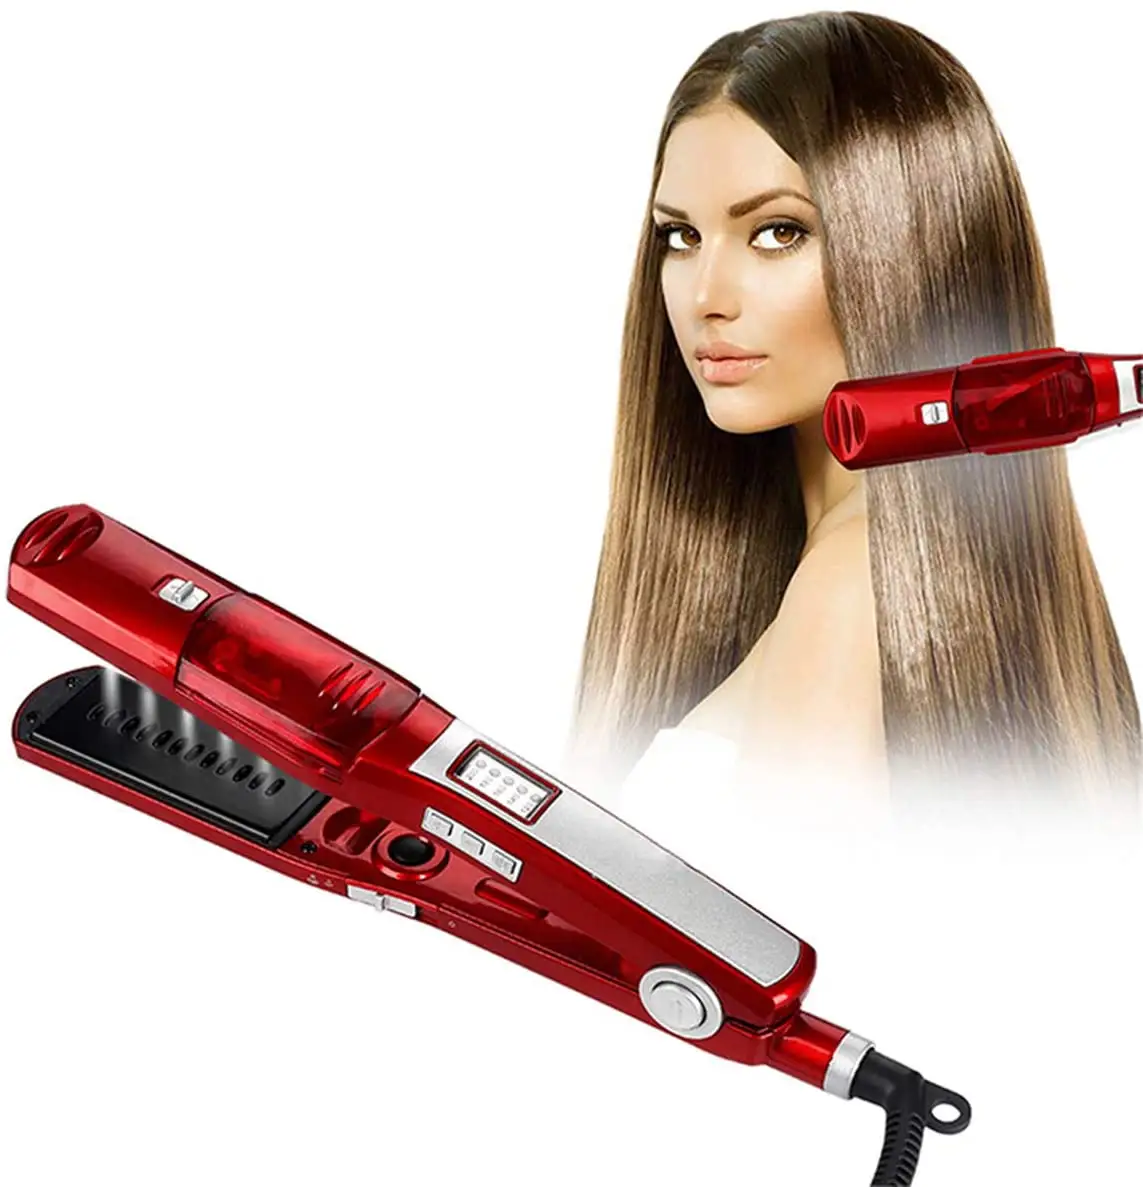 Steam And Dry Iron Hair Straighteners Hairstyling Portable Ceramic Hair Straightener Irons Styling Tools